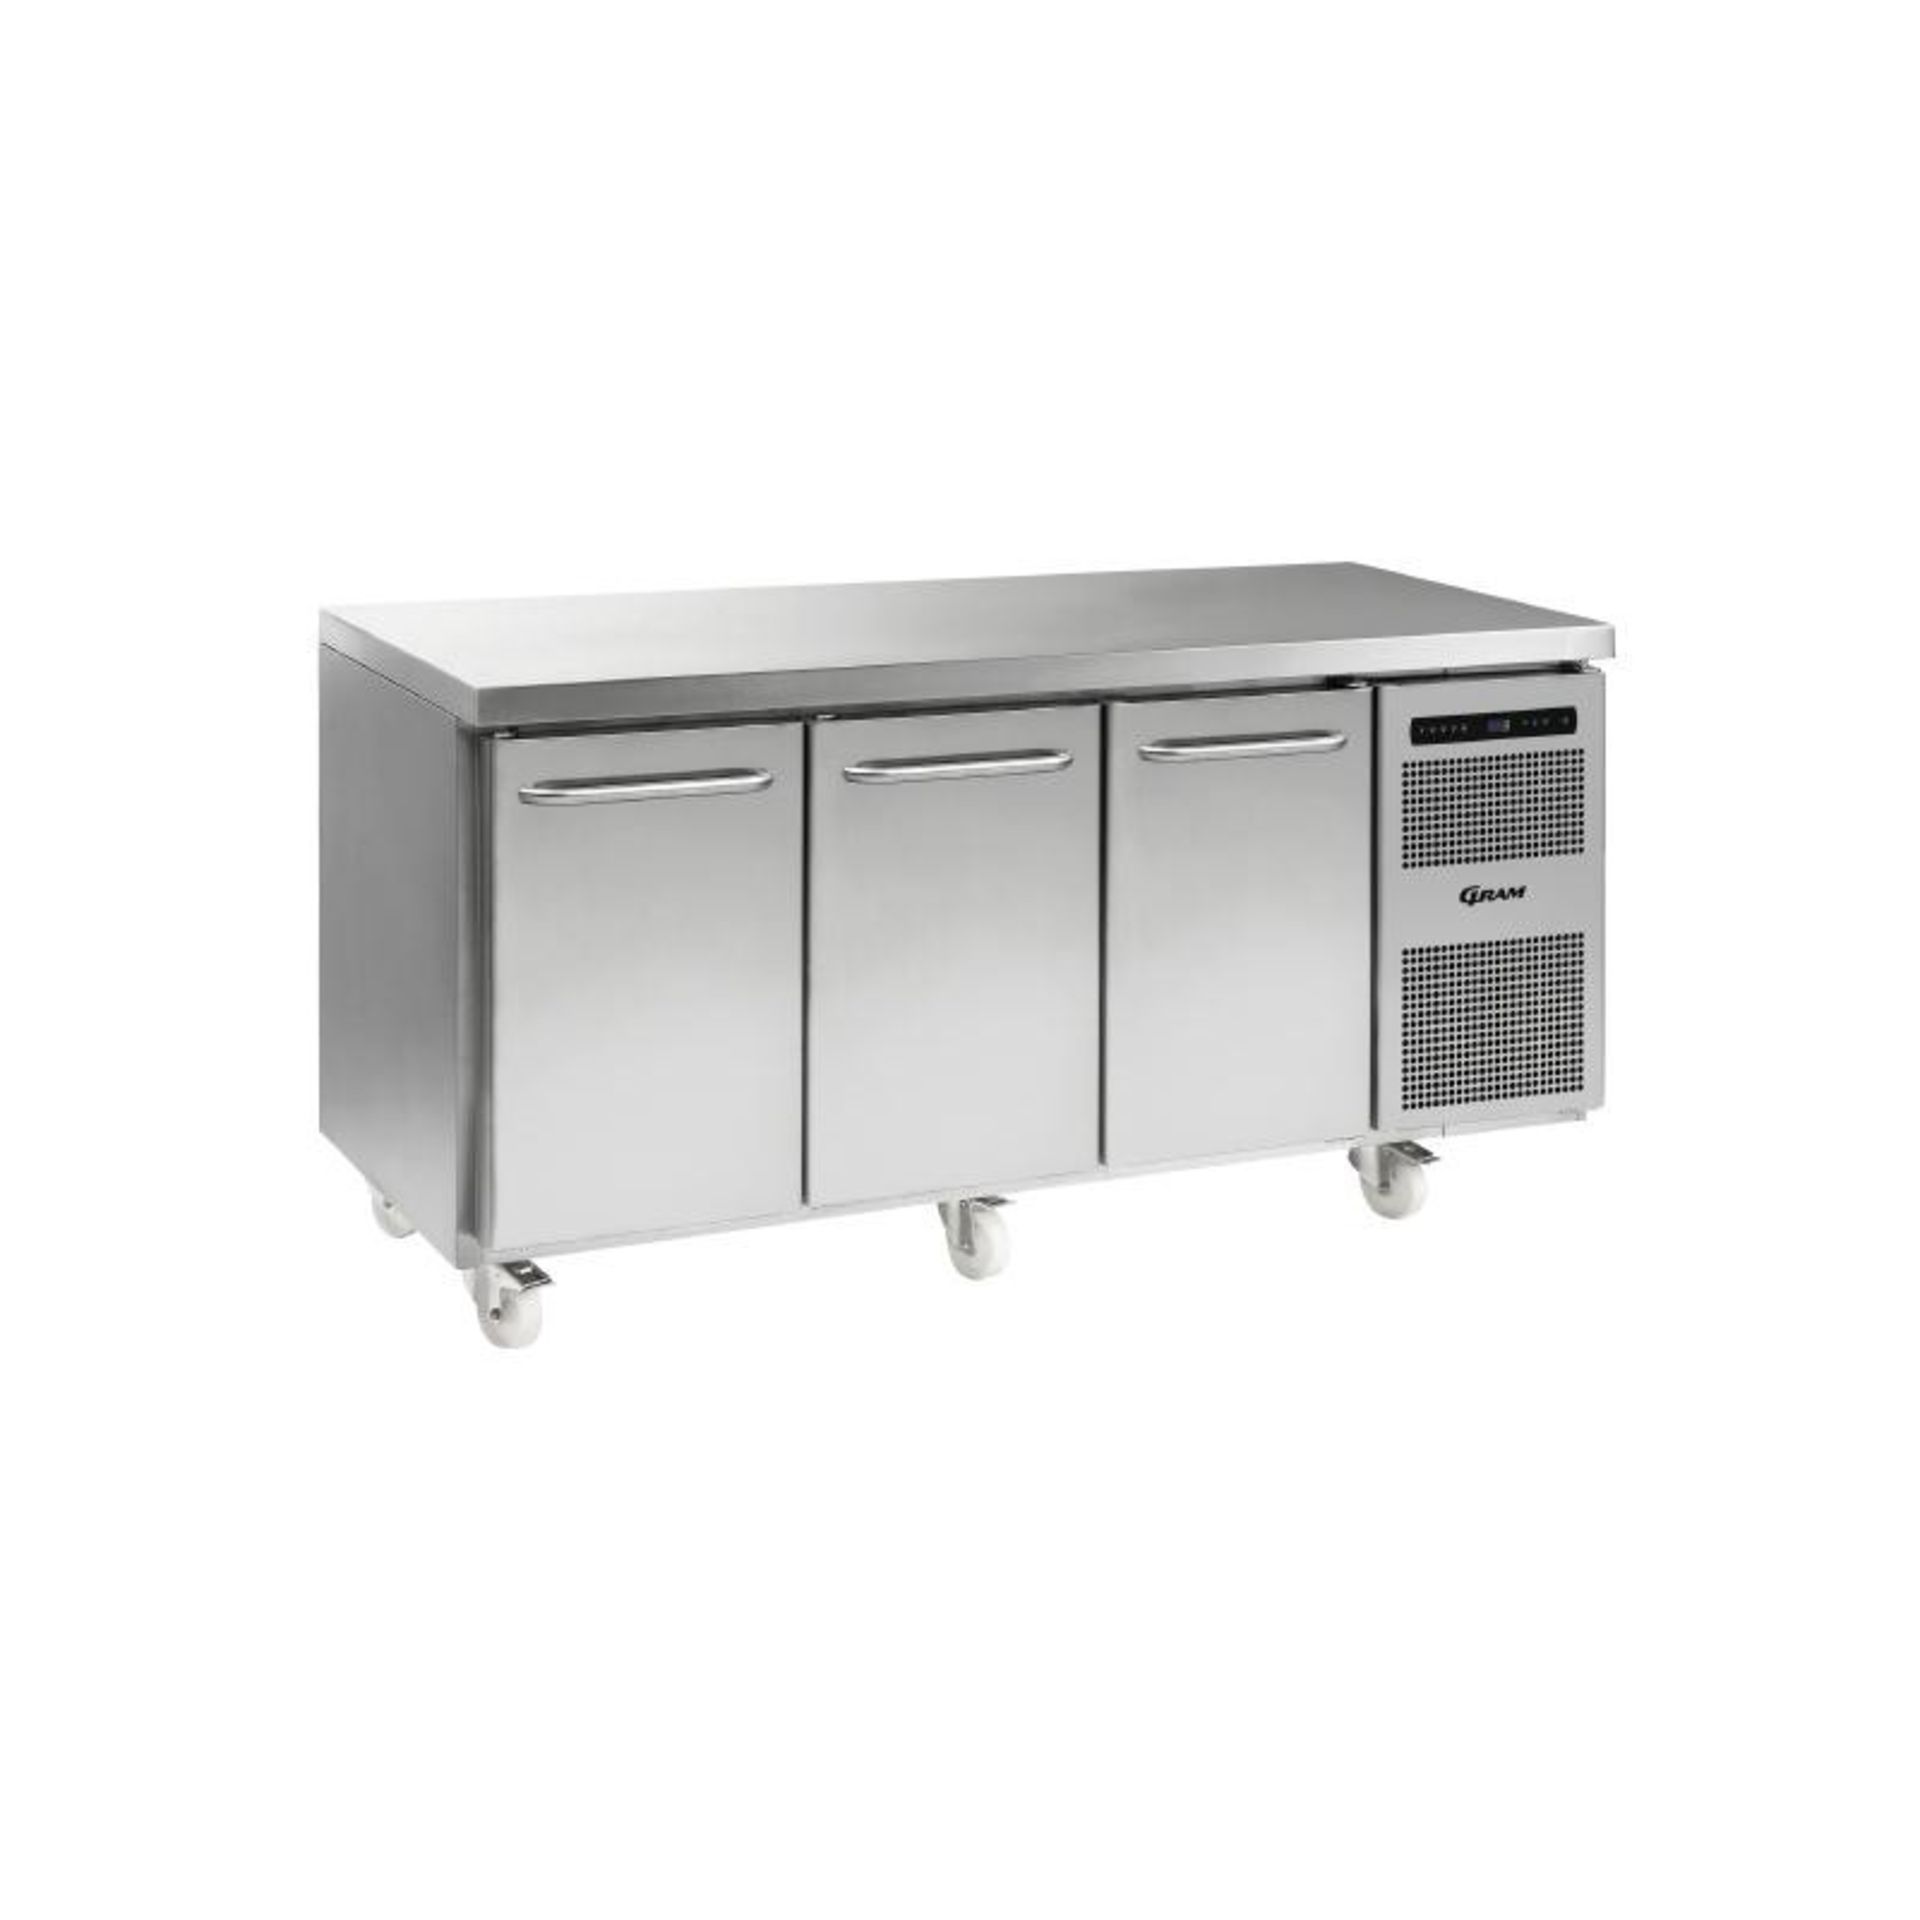 K 1807 CSG B DL DL DR C2 U Refrigerated Counter - Image 2 of 2